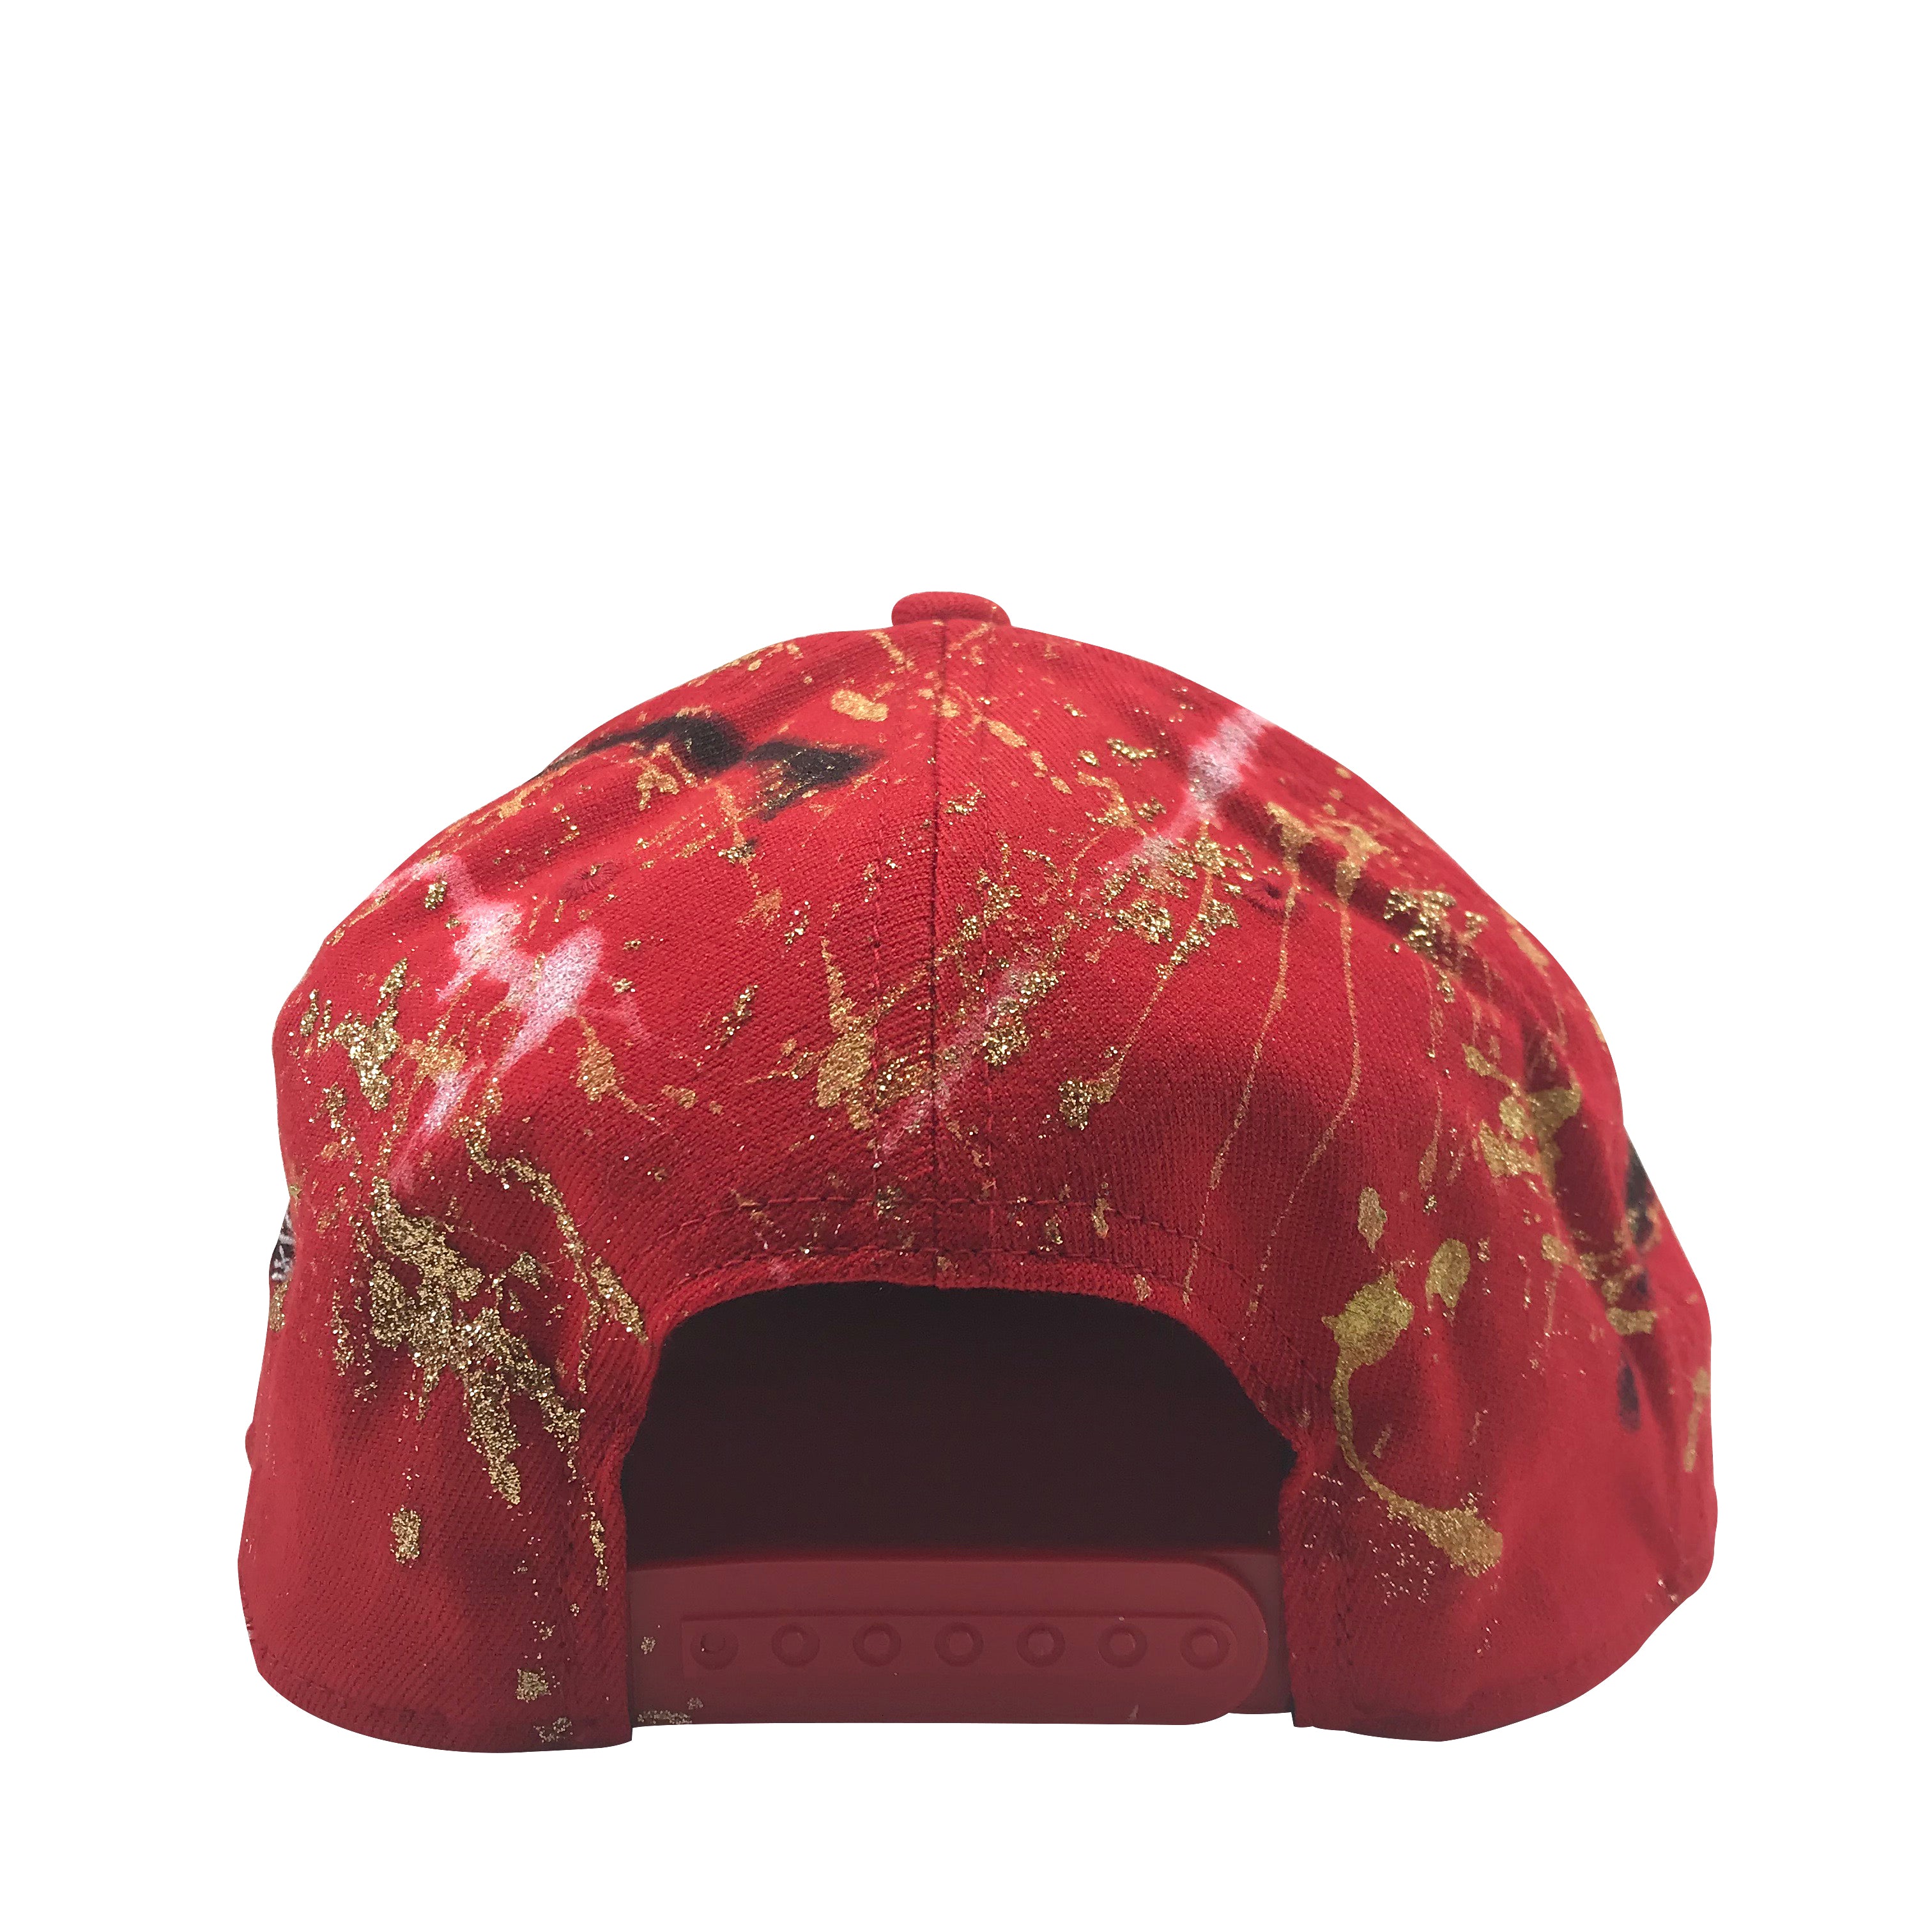 Hat - Unique hand painted / Red- B&W- Gold